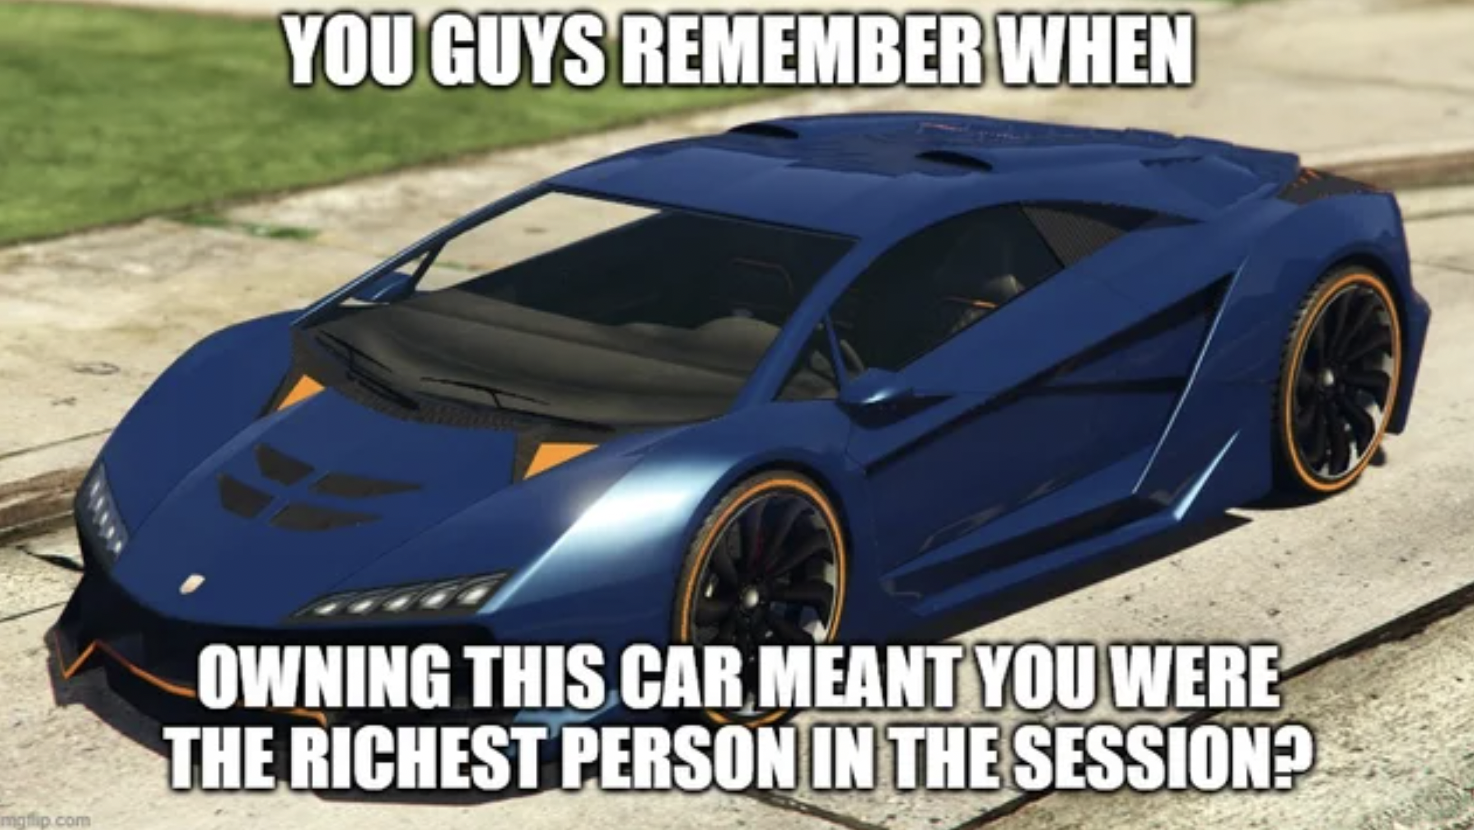 GTA V Memes - hardware - You Guys Remember When Owning This Car Meant You Were The Richest Person In The Session?